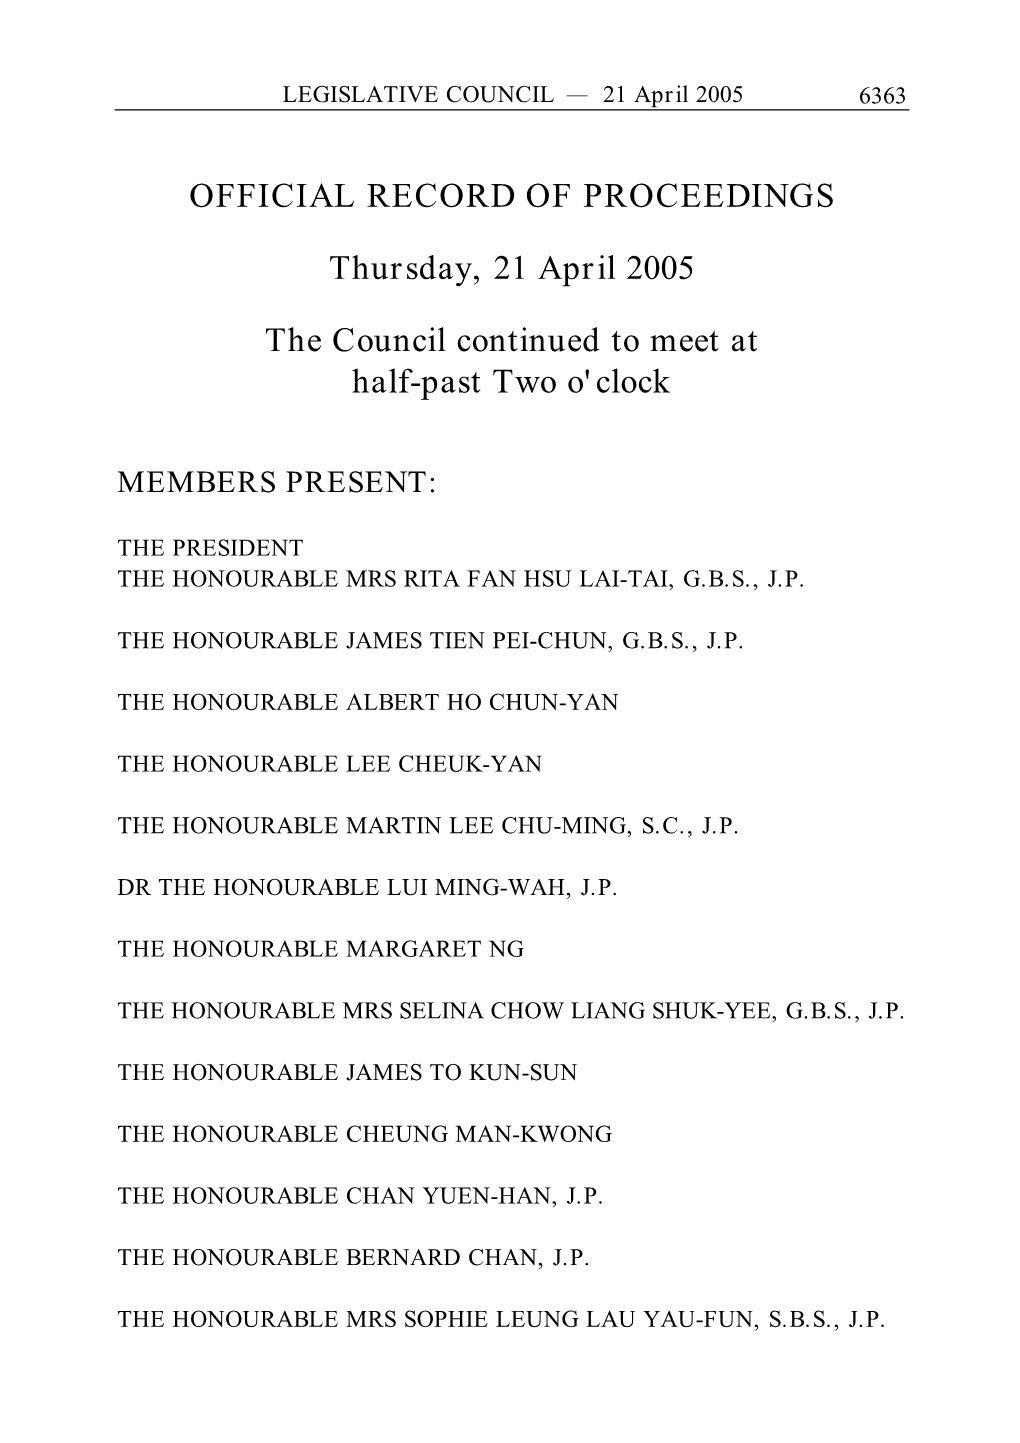 OFFICIAL RECORD of PROCEEDINGS Thursday, 21 April